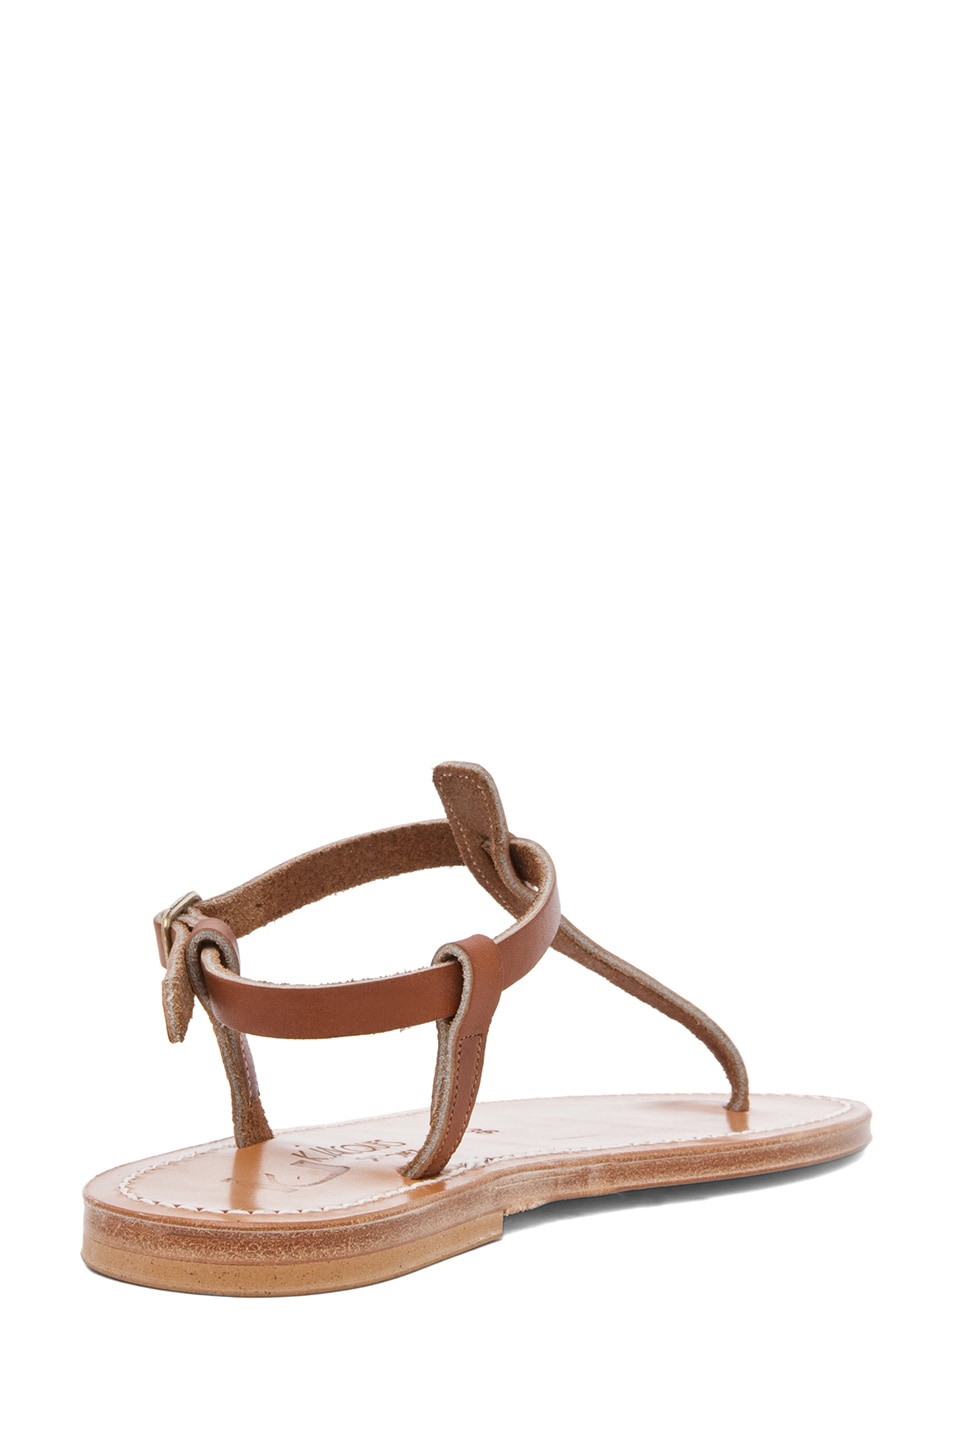 K Jacques Picon T Strap Sandals in Natural | FWRD